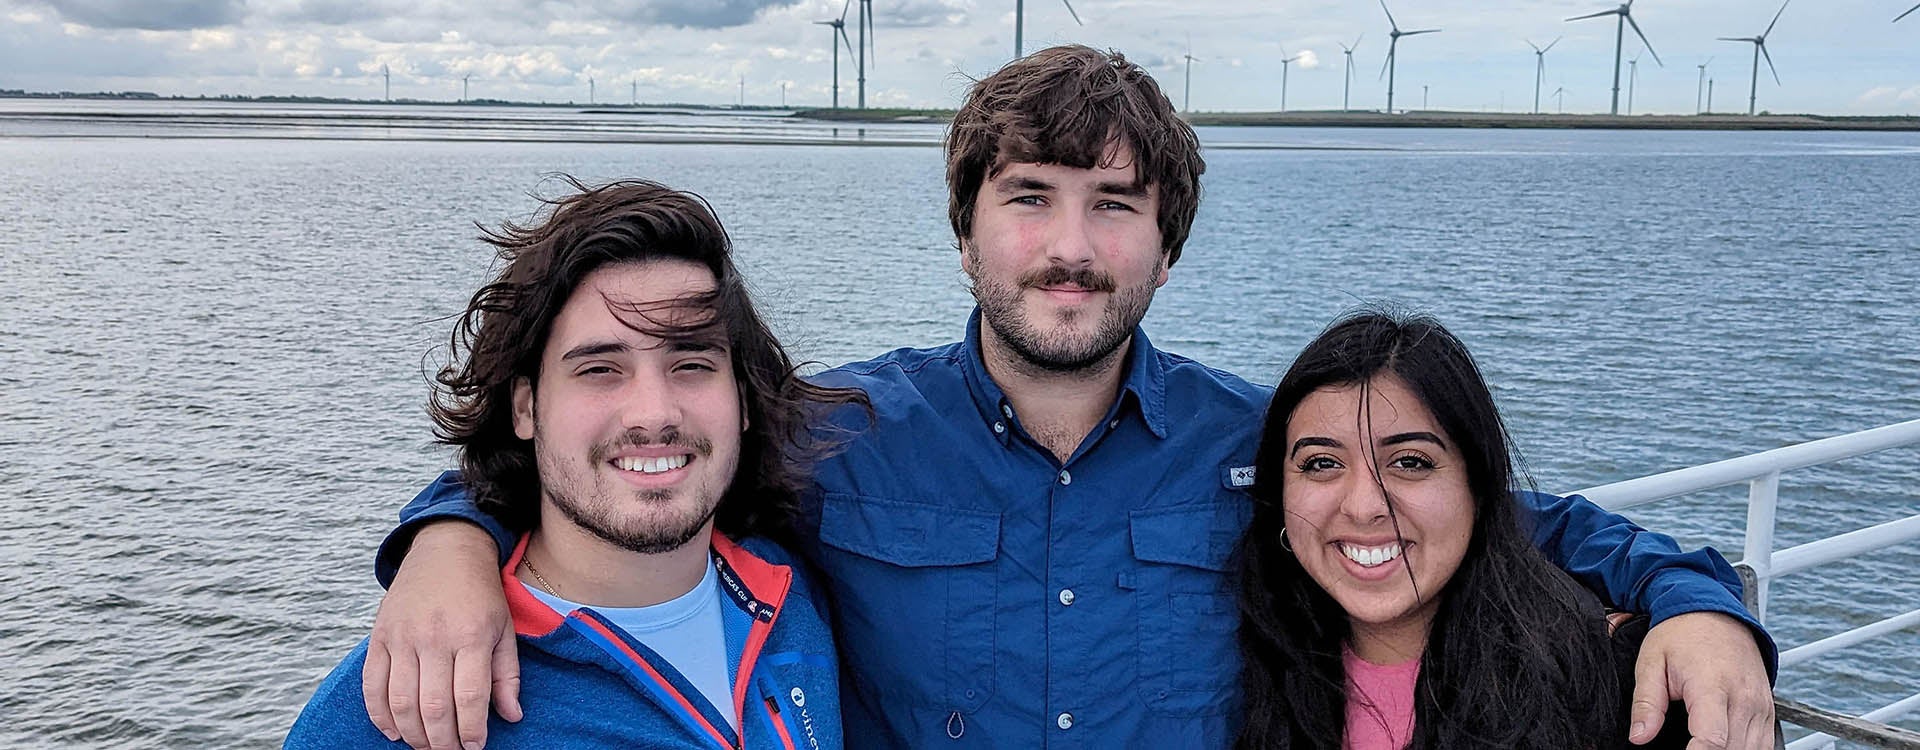 East Carolina University construction management students, from left, Stavros Boardman, Carson Haithcox and Jalene Camey are pictured at the “Oosterscheldekering,” which is the eastern storm surge barrier in the Netherlands. They visited the county as part of HAN University's International Week. (Contributed photos)